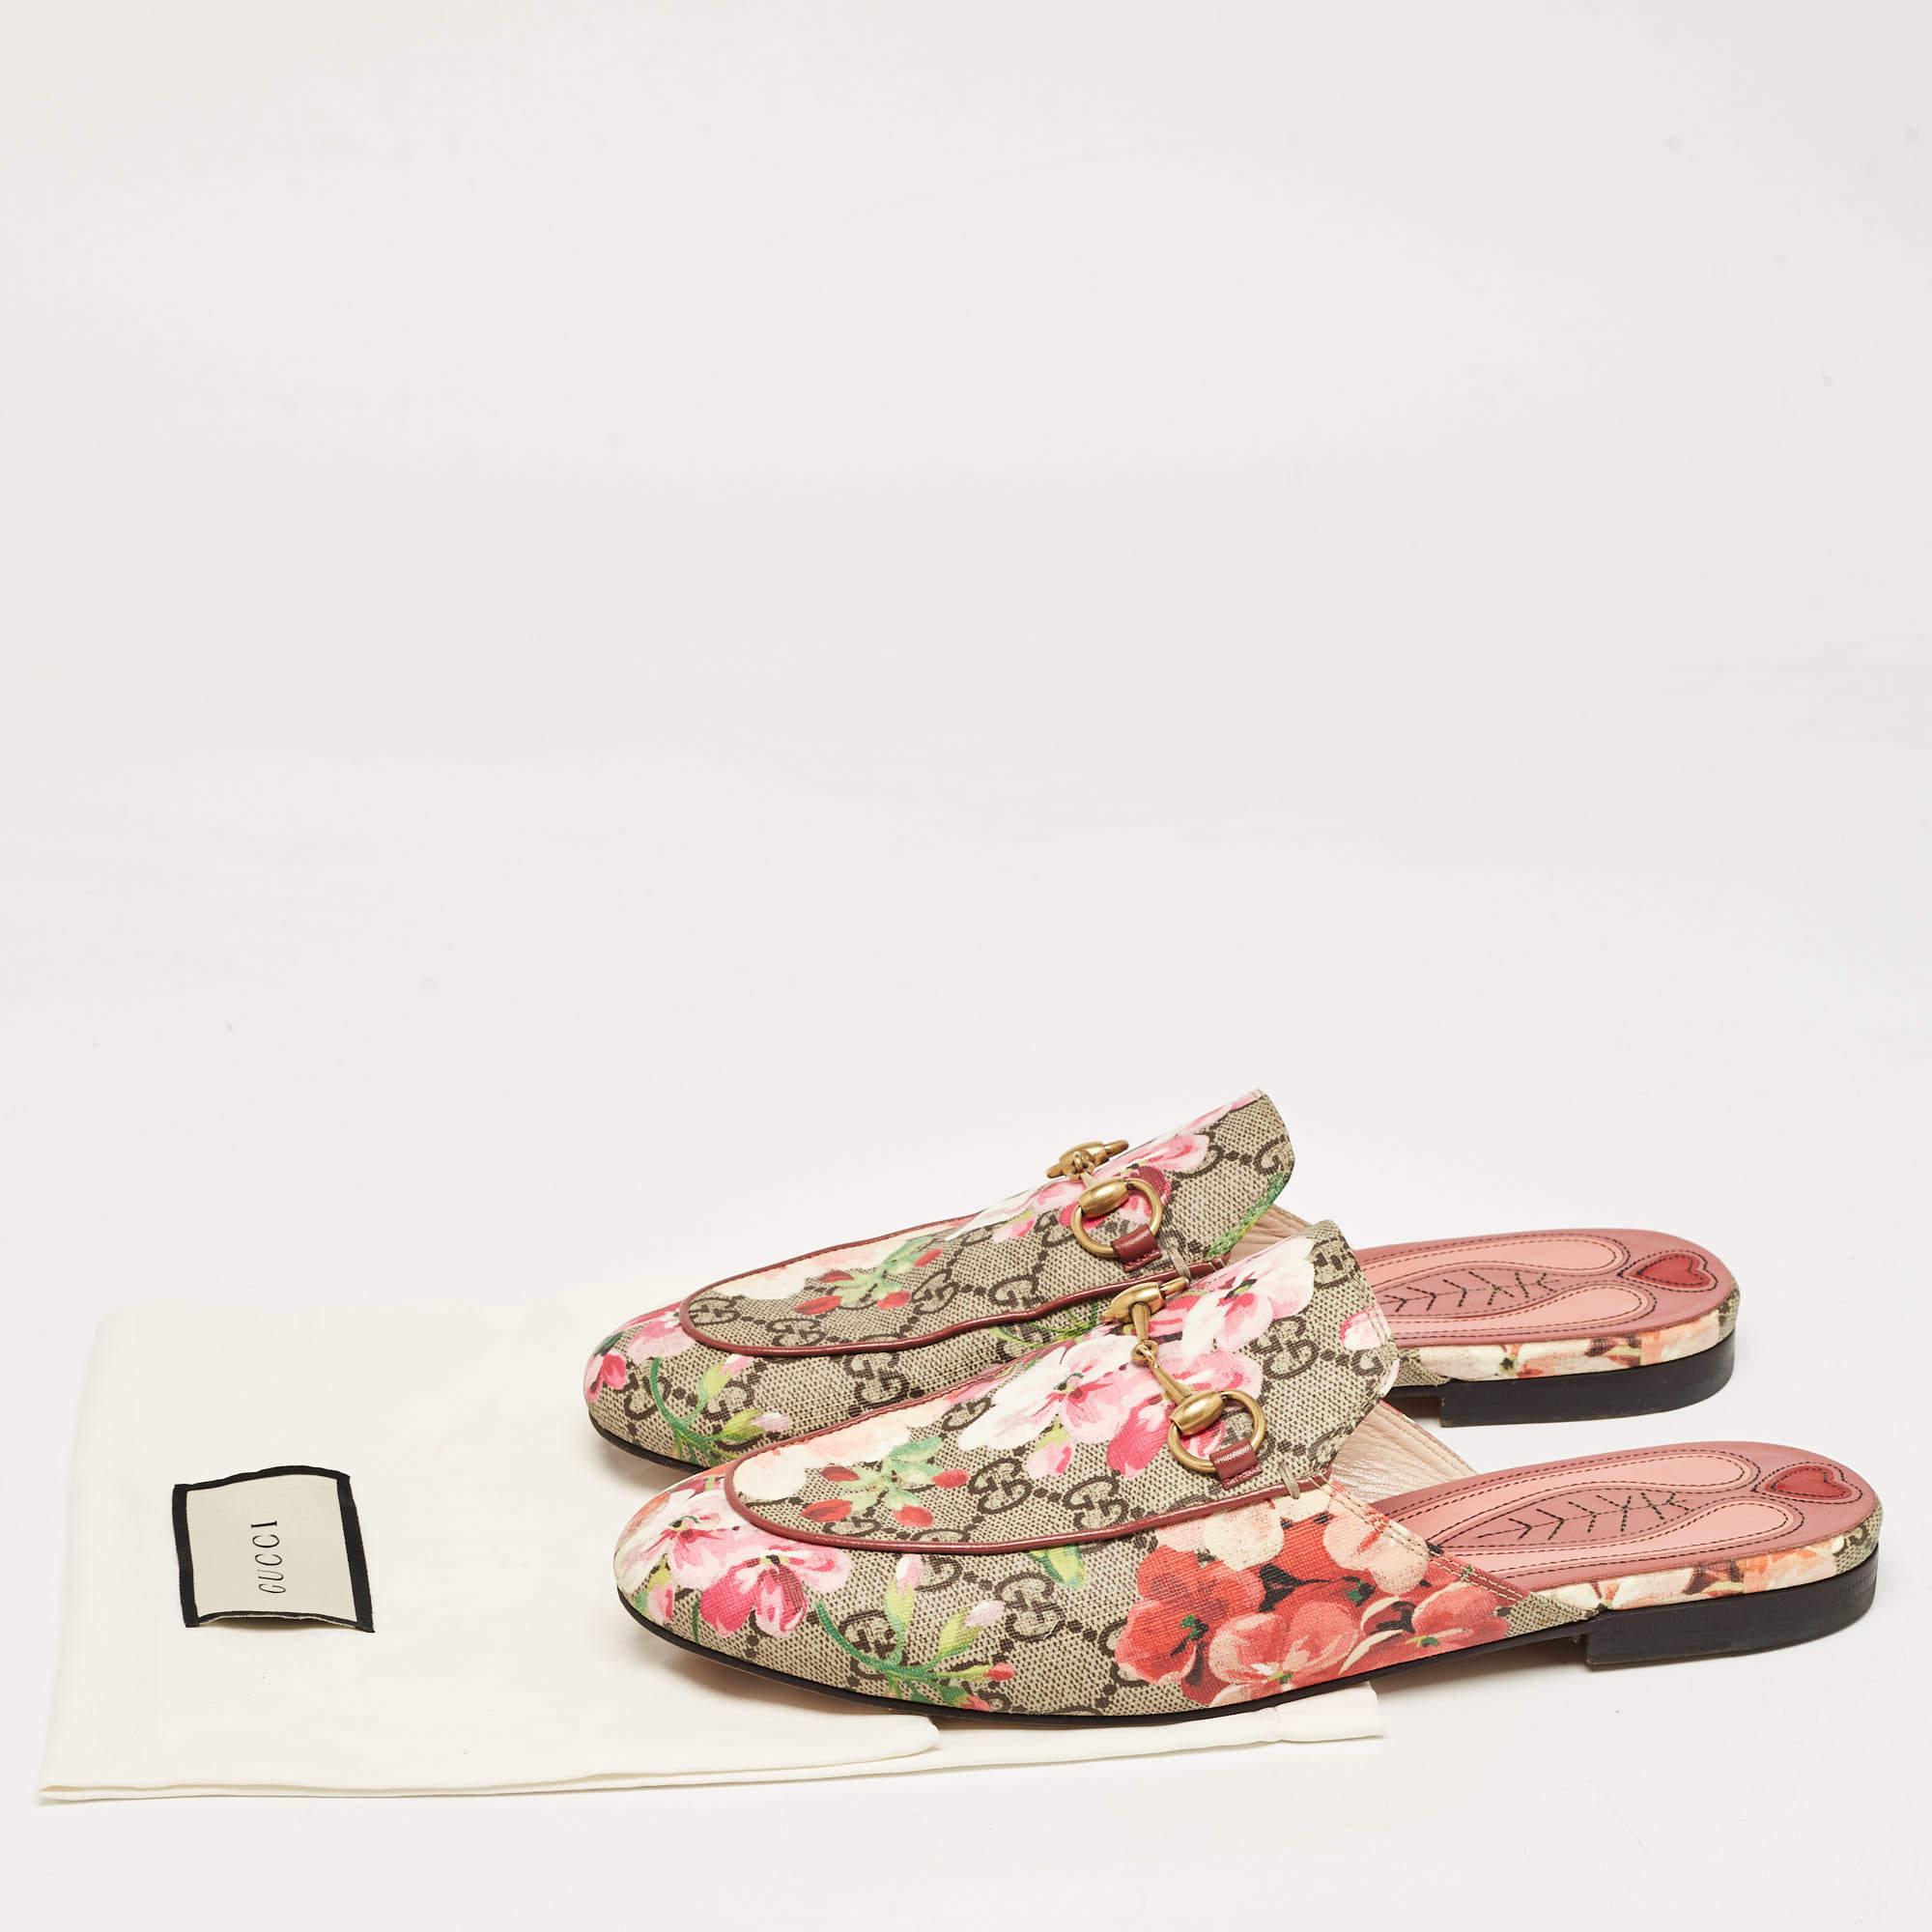 Gucci Multicolor GG Canvas Blooms Printed Princetown Mules Size 38.5 5